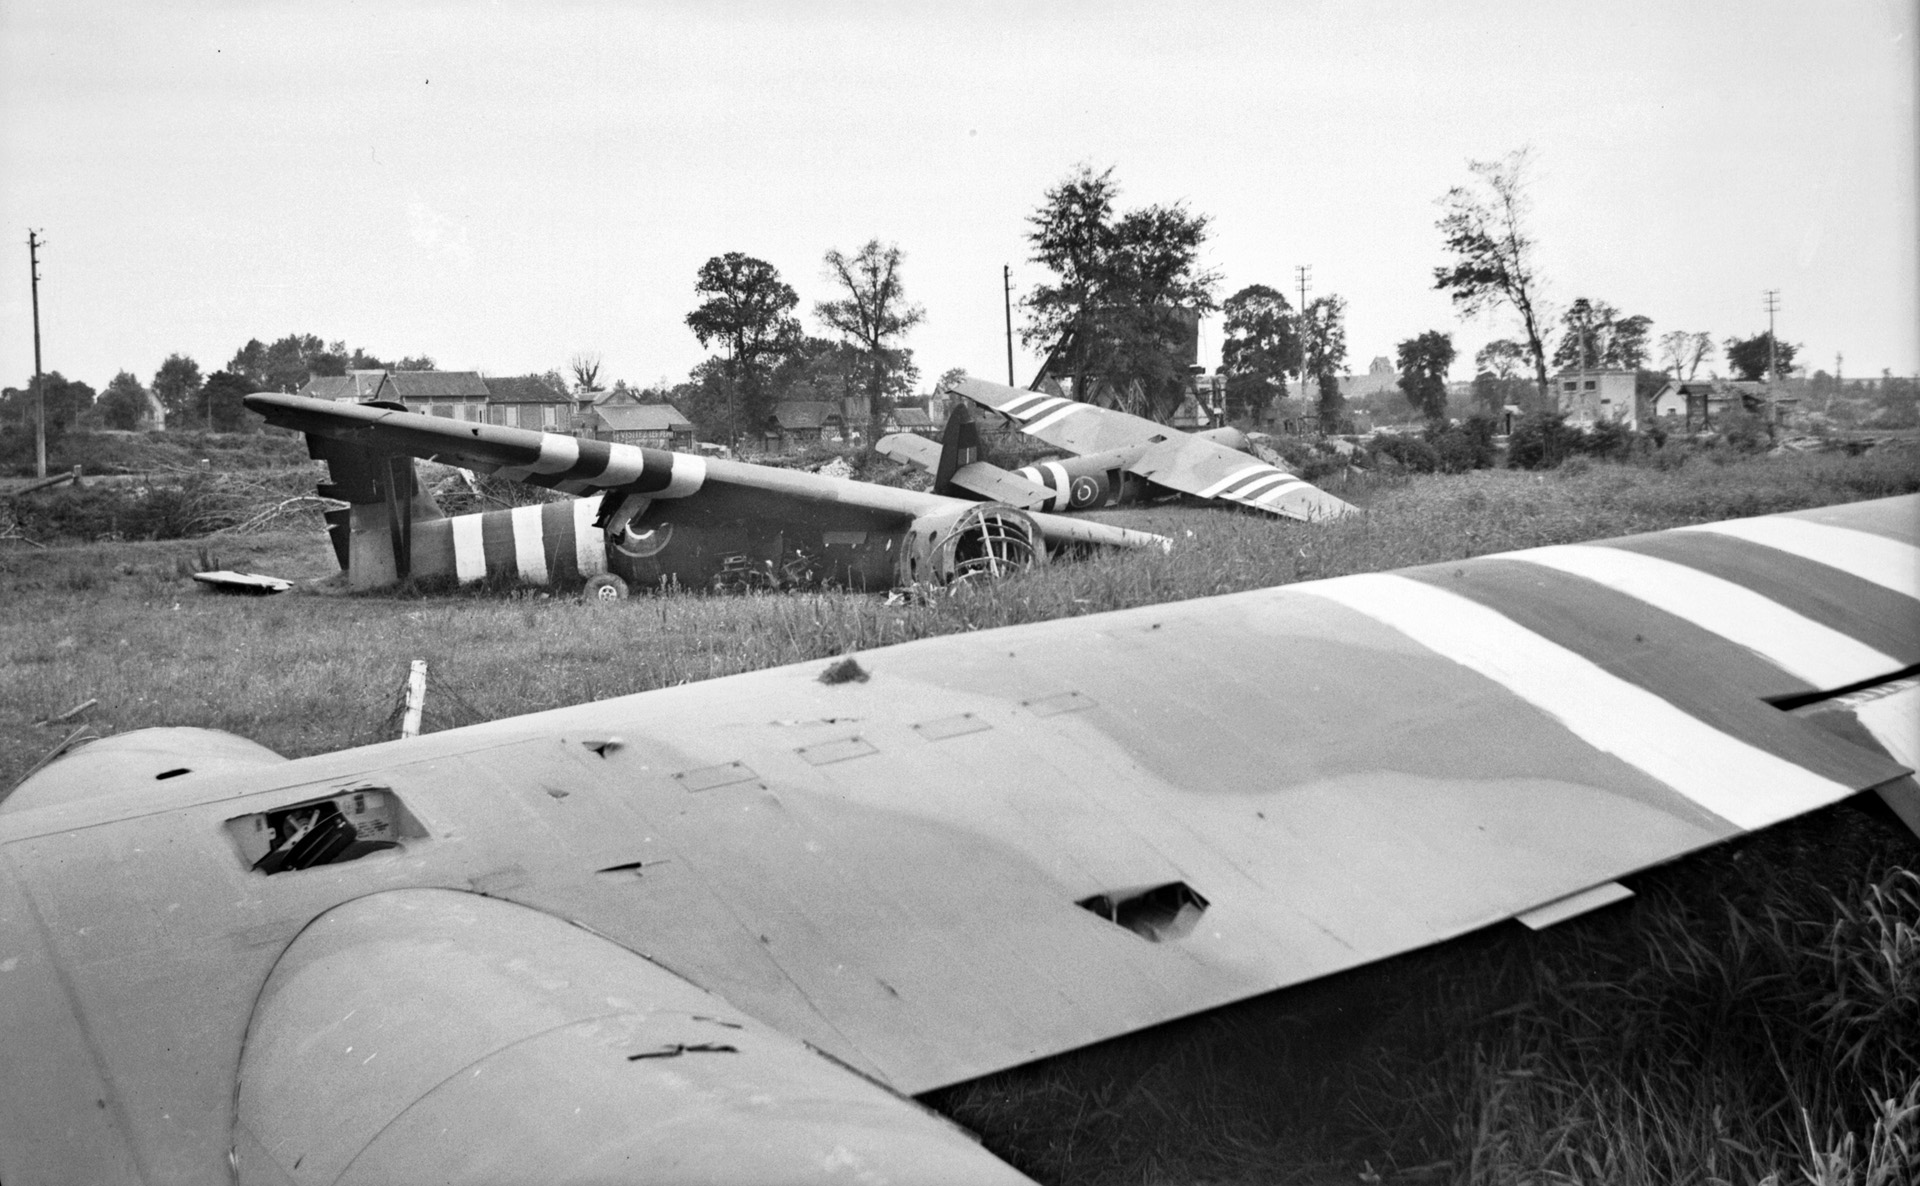 The wreckage of Horsa gliders litter a field near the Caen Canal Bridge. The impact of the landing ripped some of the men from their safety harnesses and hurled them through the cockpit window of the glider.